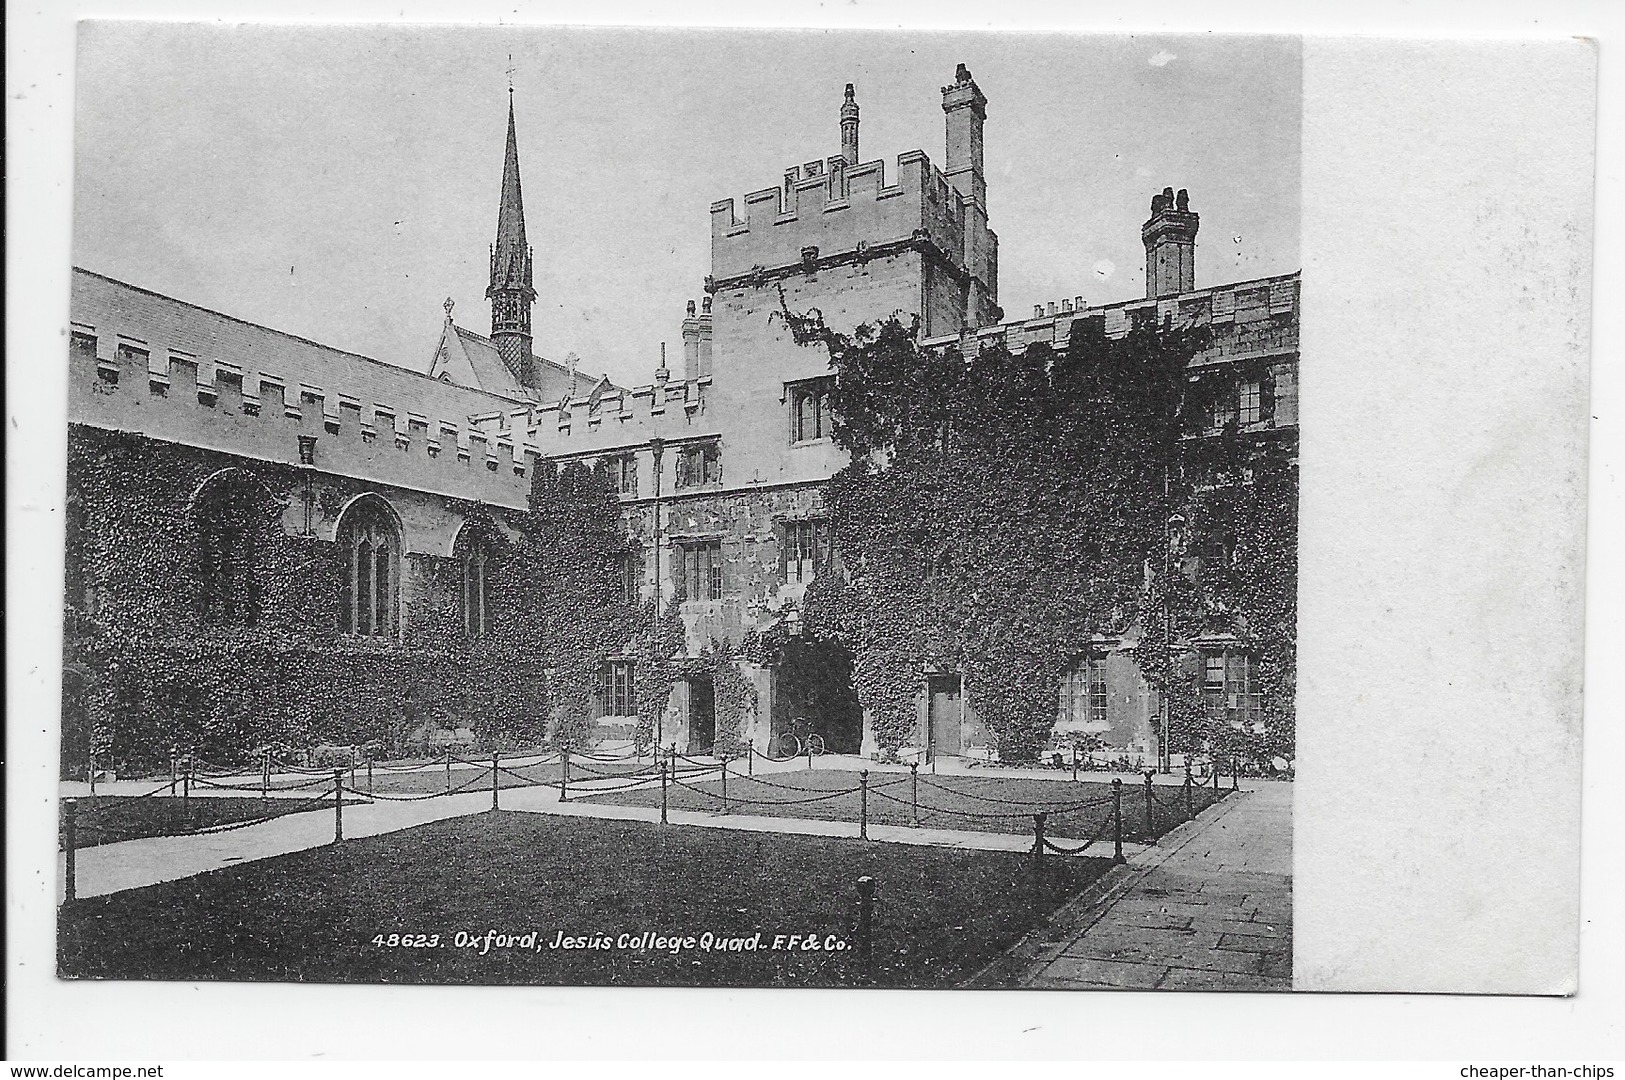 Oxford - Jesus College Quad.  - Early Frith 48623 - Oxford